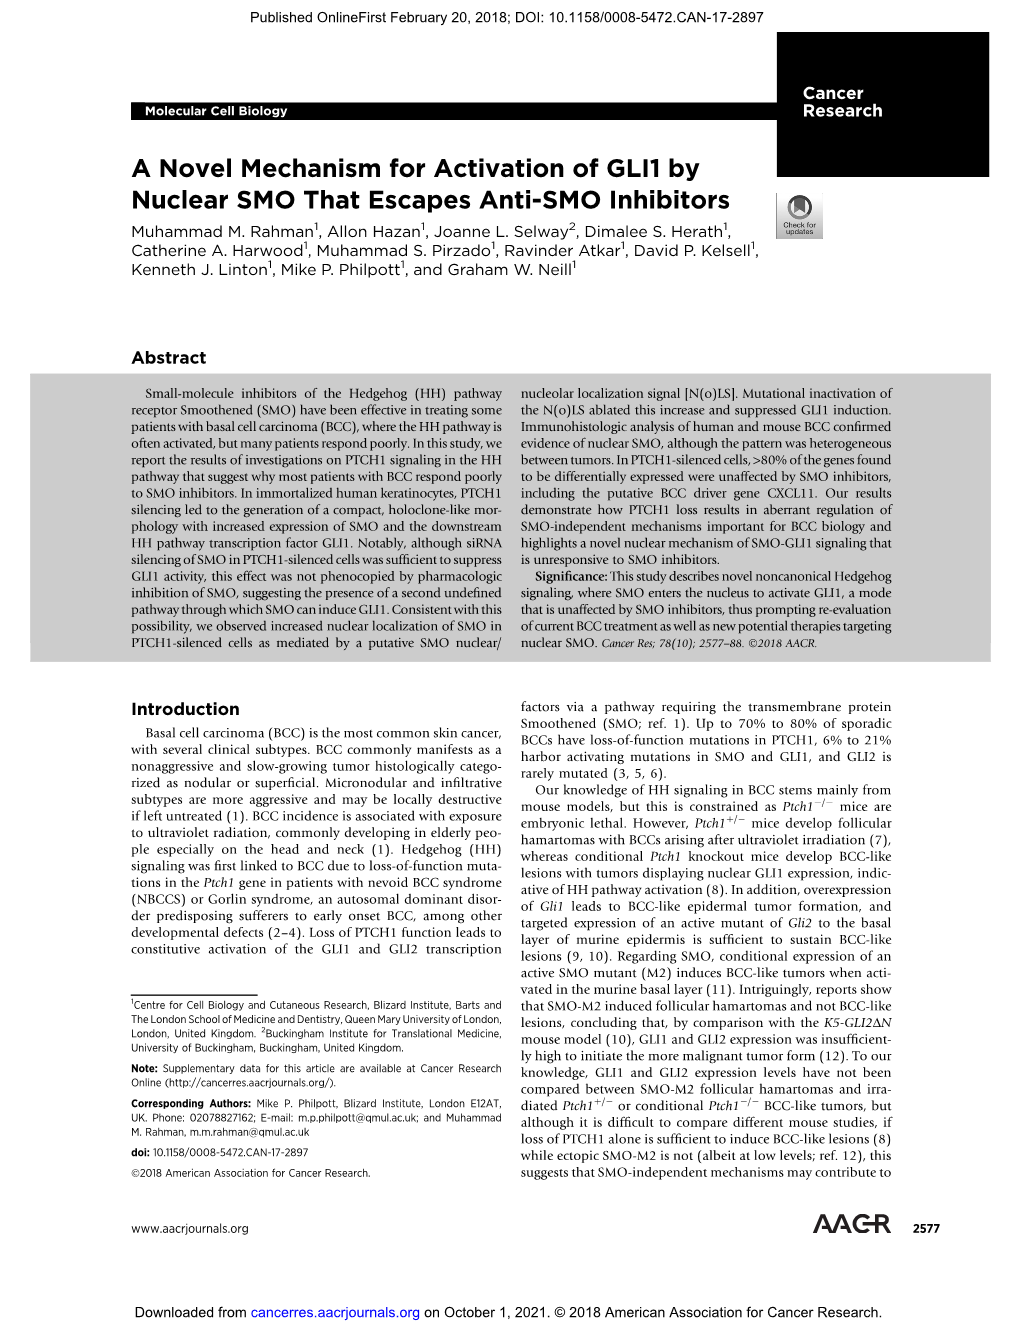 A Novel Mechanism for Activation of GLI1 by Nuclear SMO That Escapes Anti-SMO Inhibitors Muhammad M